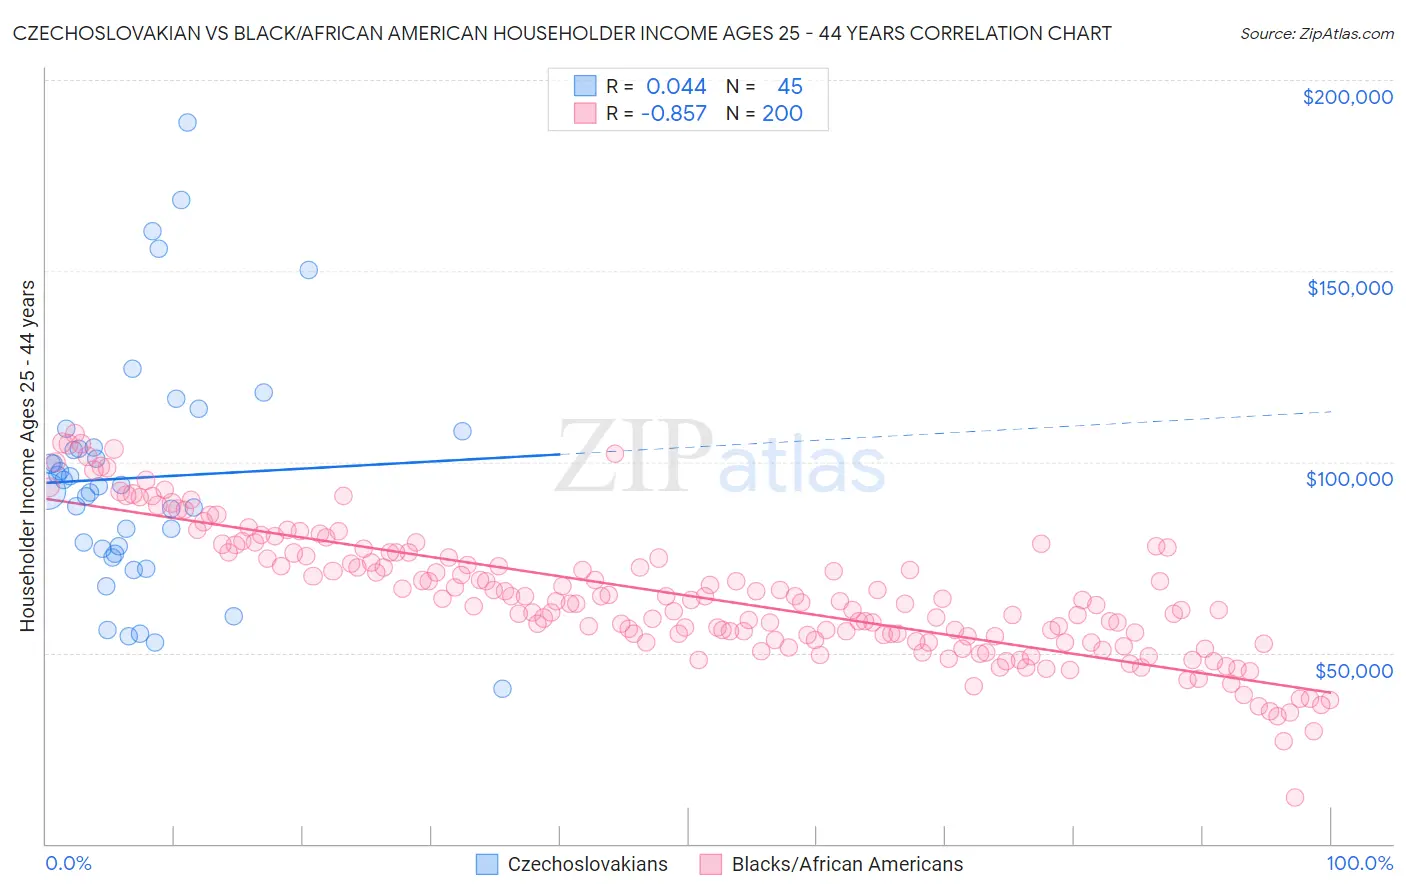 Czechoslovakian vs Black/African American Householder Income Ages 25 - 44 years